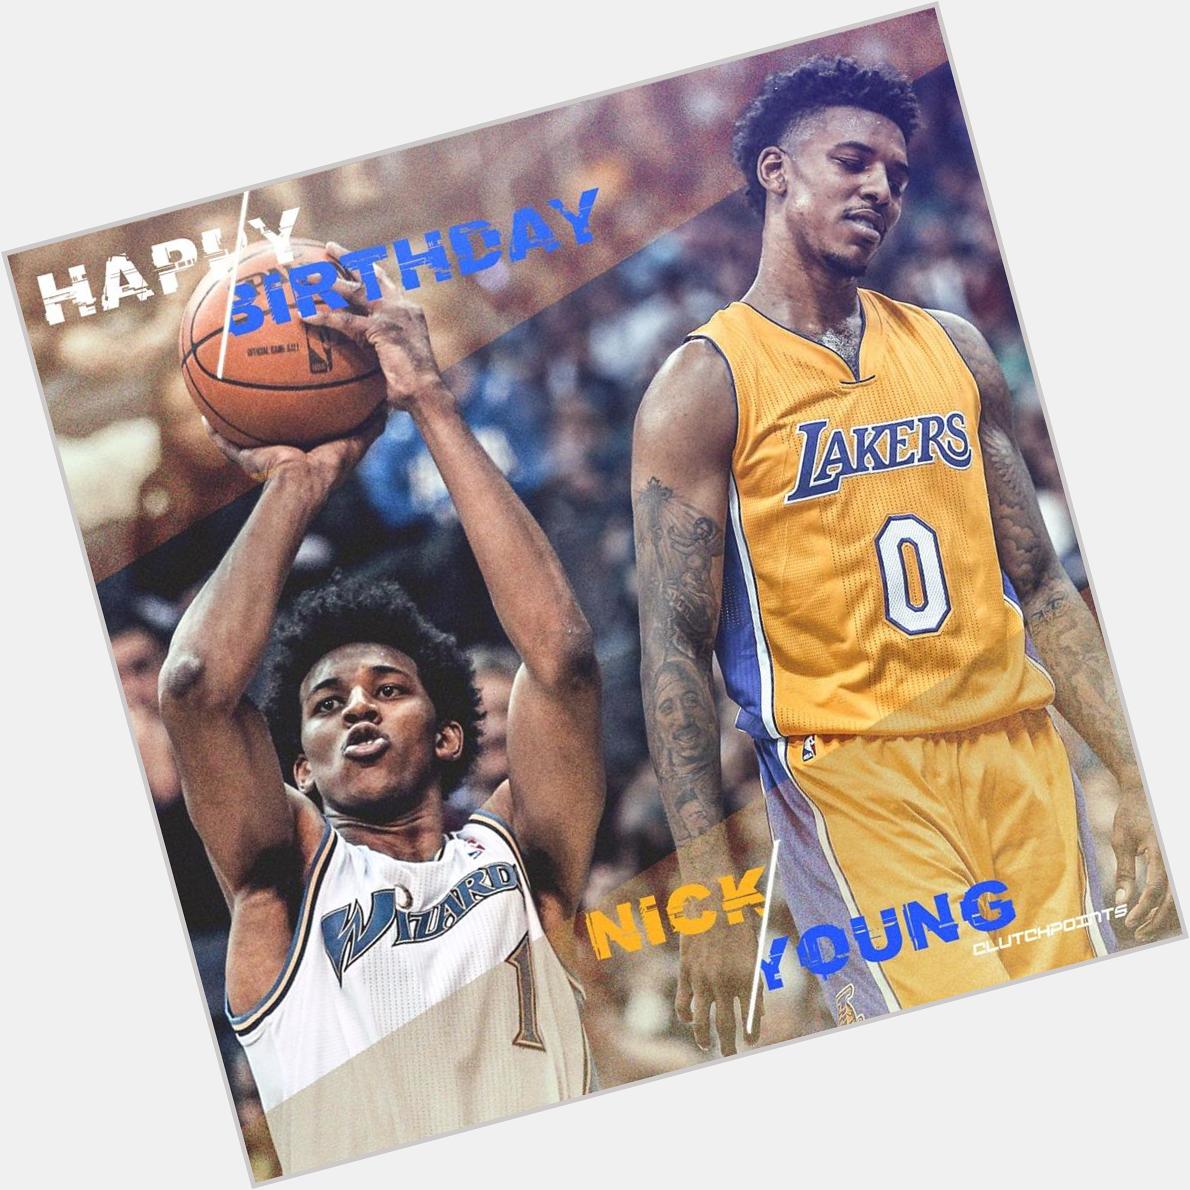 Happy 34th birthday to Nick Young!  